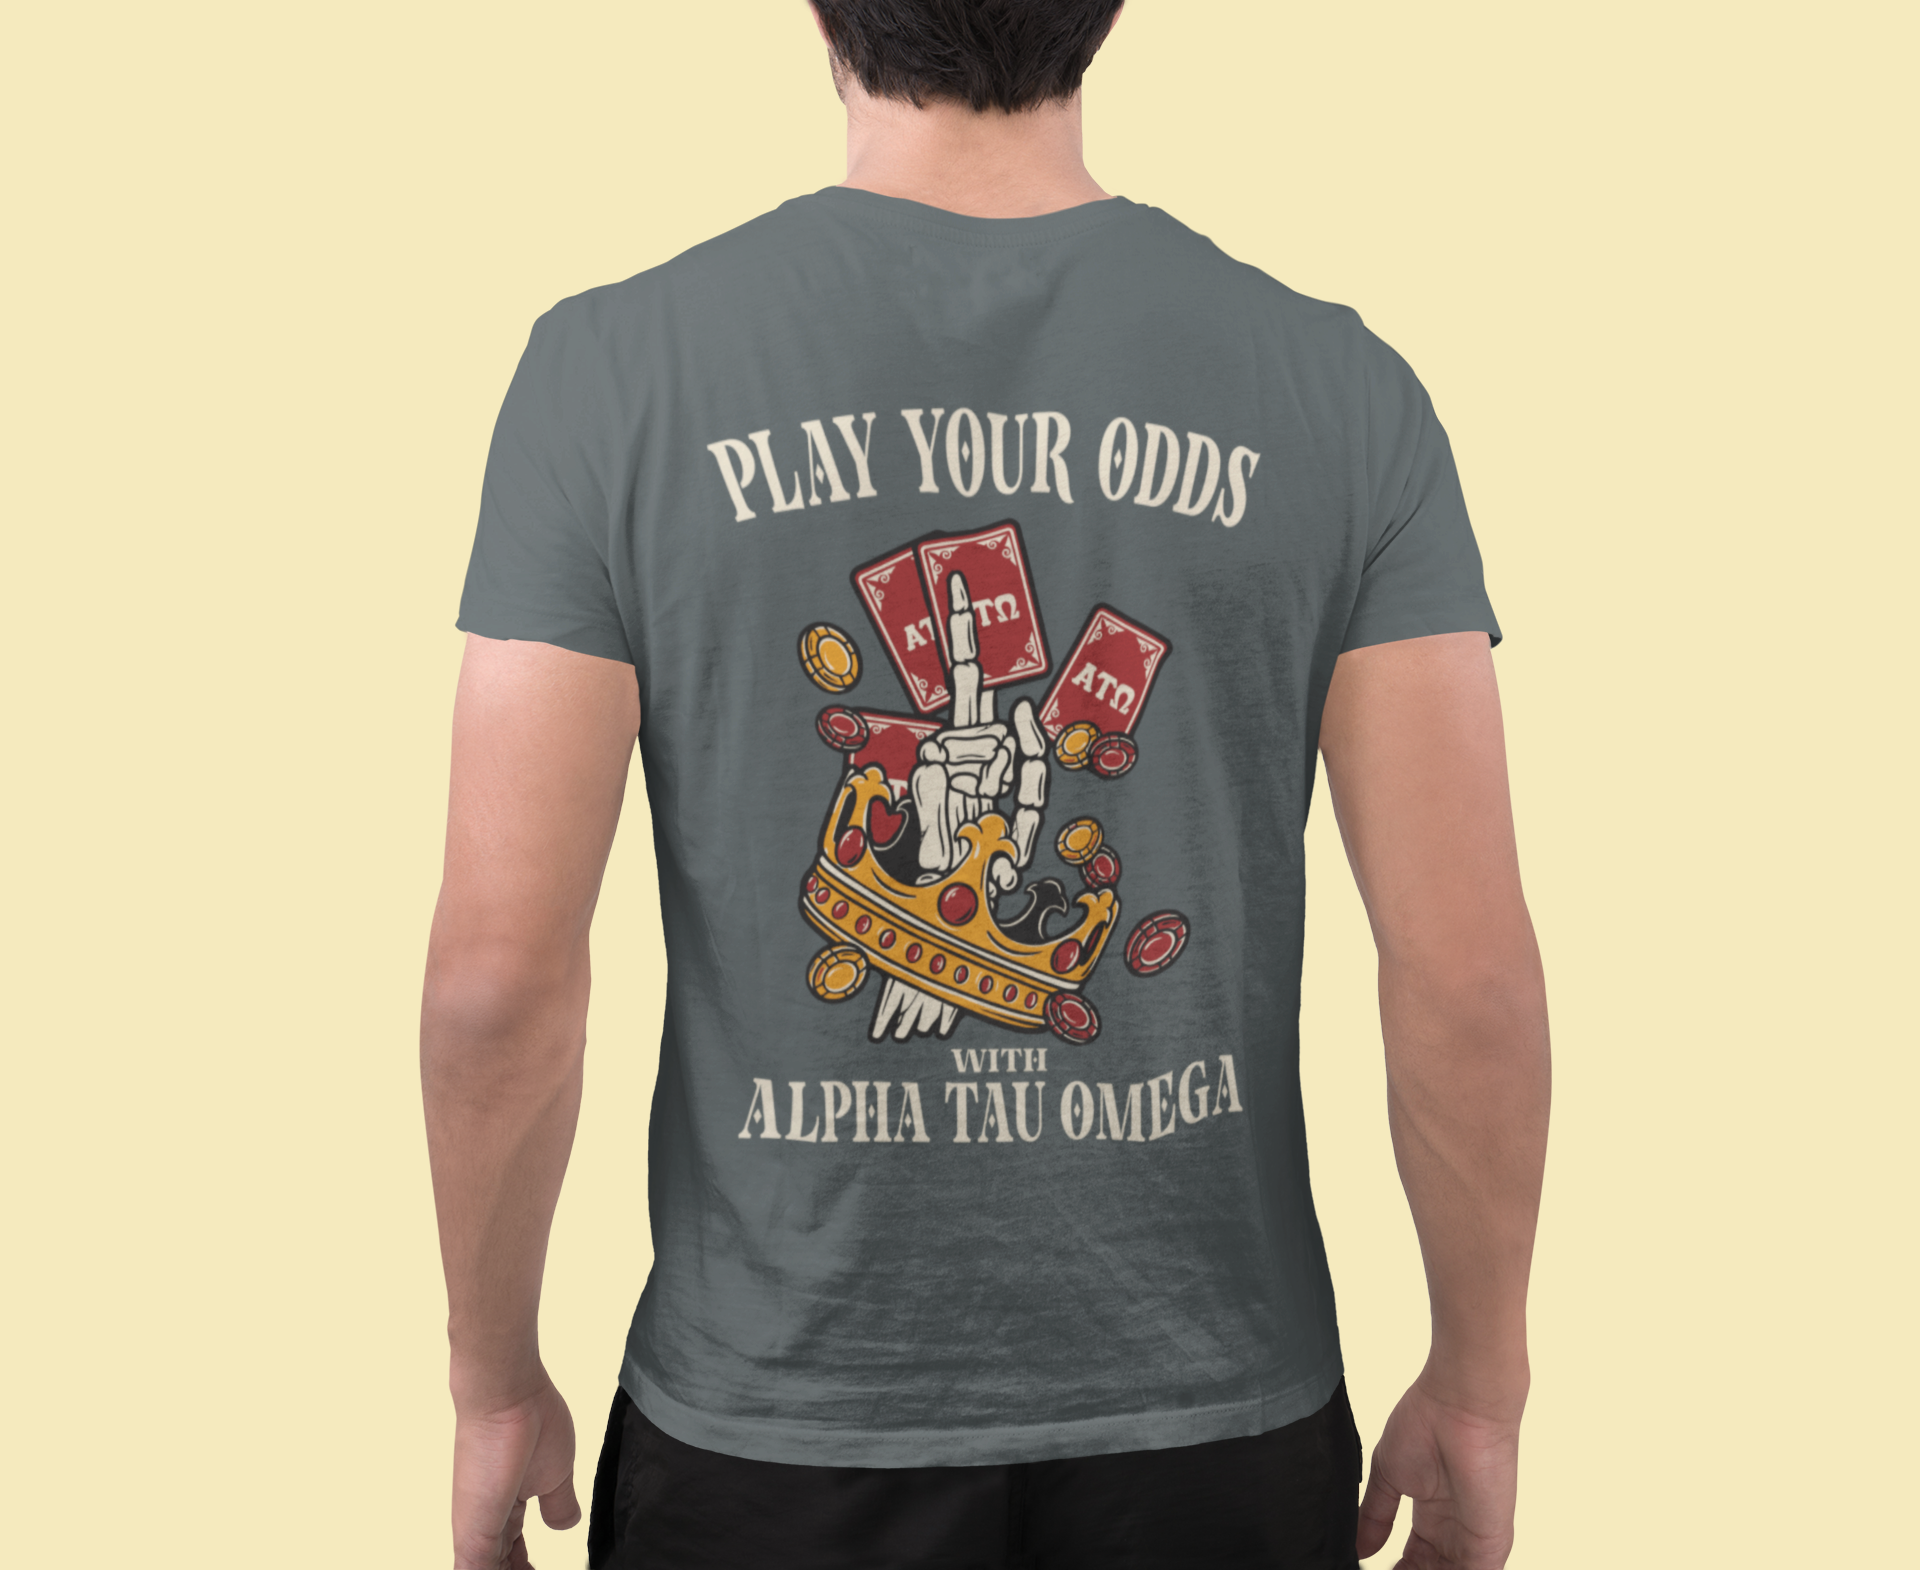 Grey Alpha Tau Omega Graphic T-Shirt | Play Your Odds | Fraternity Merchandise model 